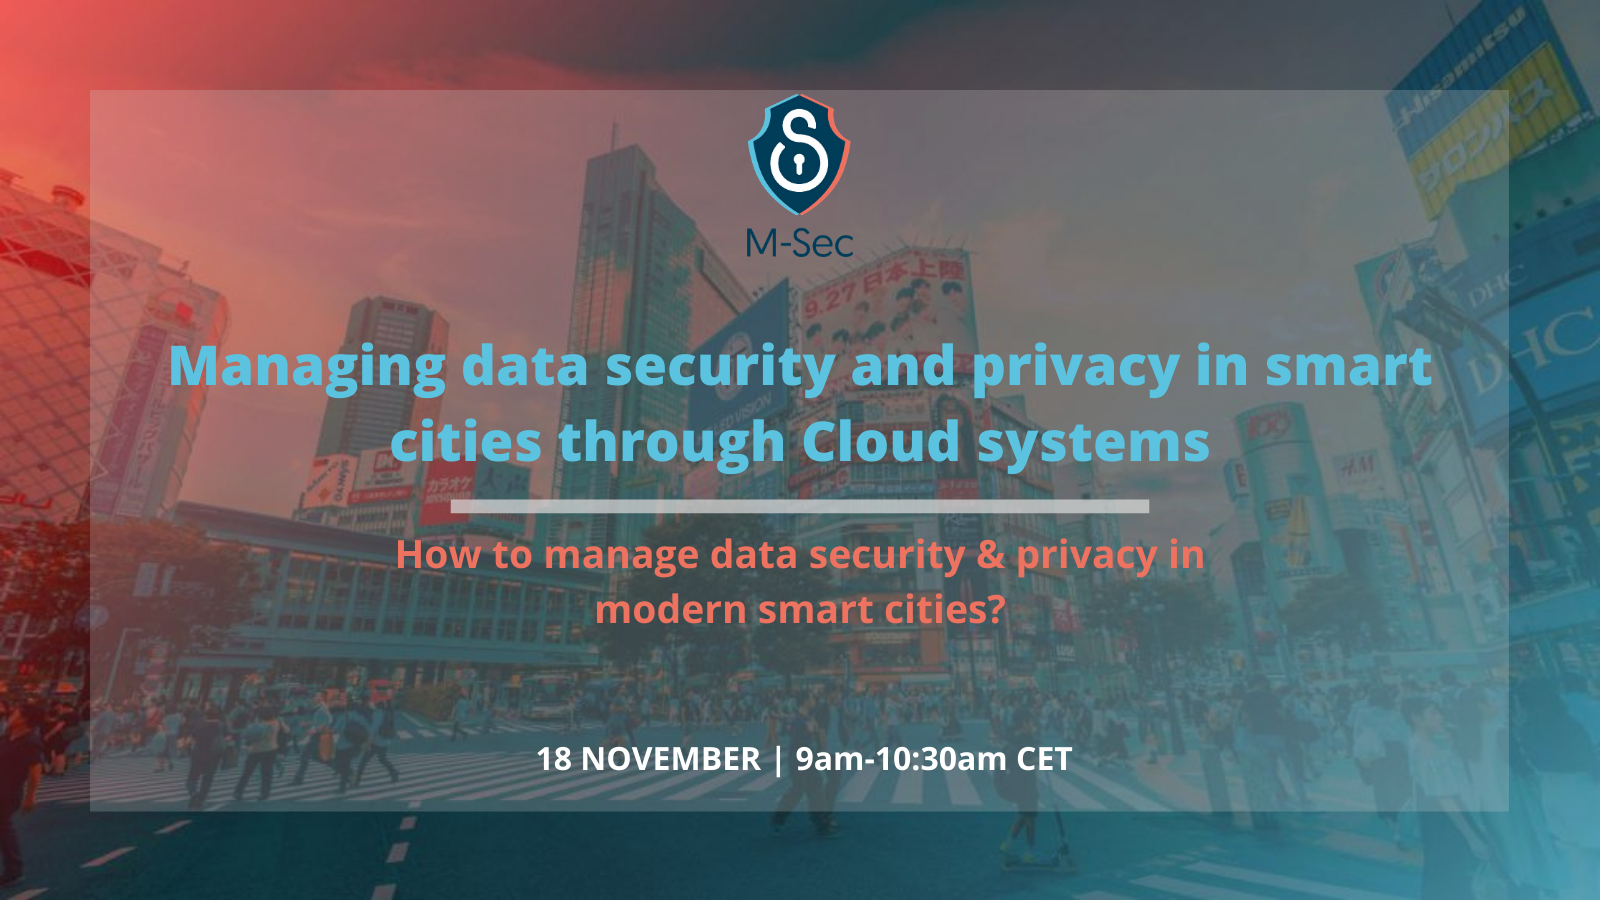 How to manage data security & privacy in modern smart cities?